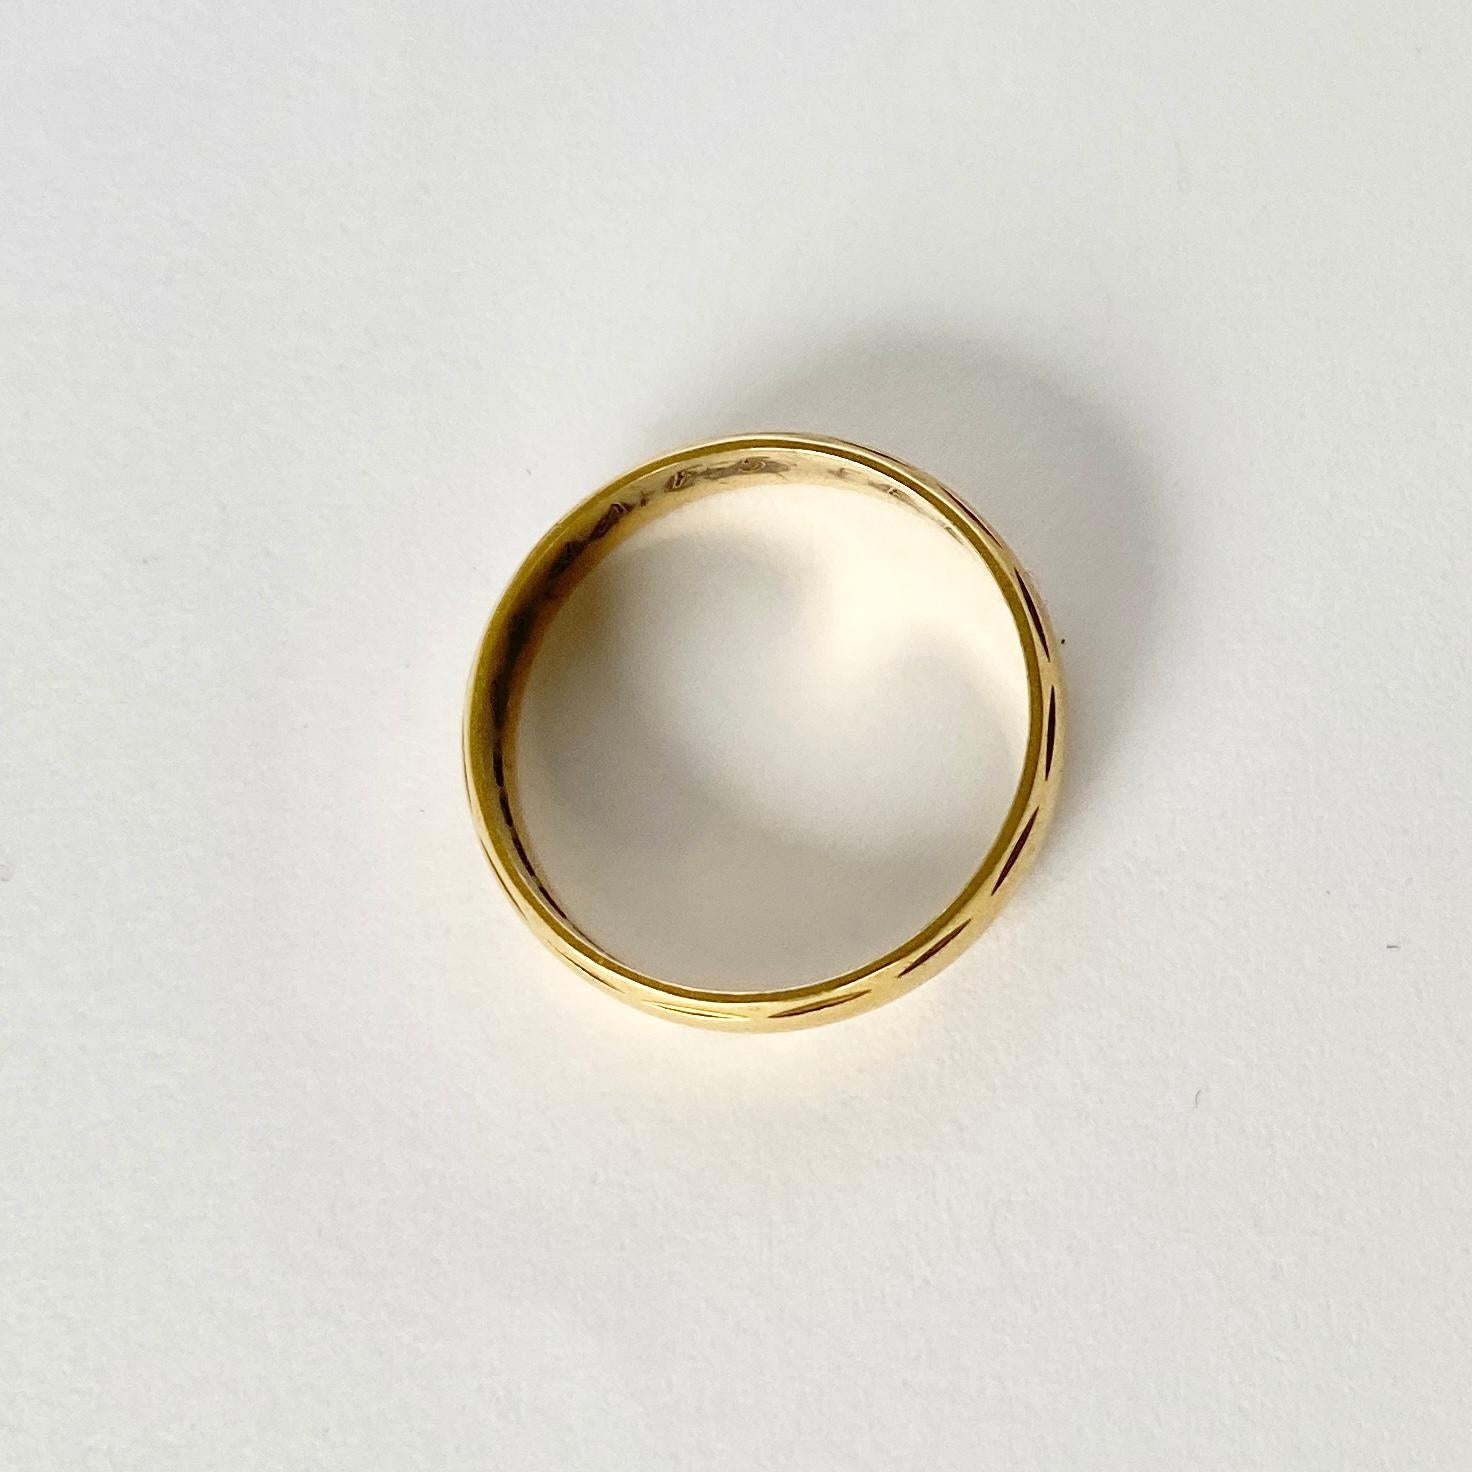 The engraving on this 18ct gold band is simple but lovely. This band would make a gorgeous fancy wedding band or a beautiful every day wear ring. Hallmarked London 1970.

Ring Size: N or 6 3/4
Band Width: 5mm

Weight: 3.5g